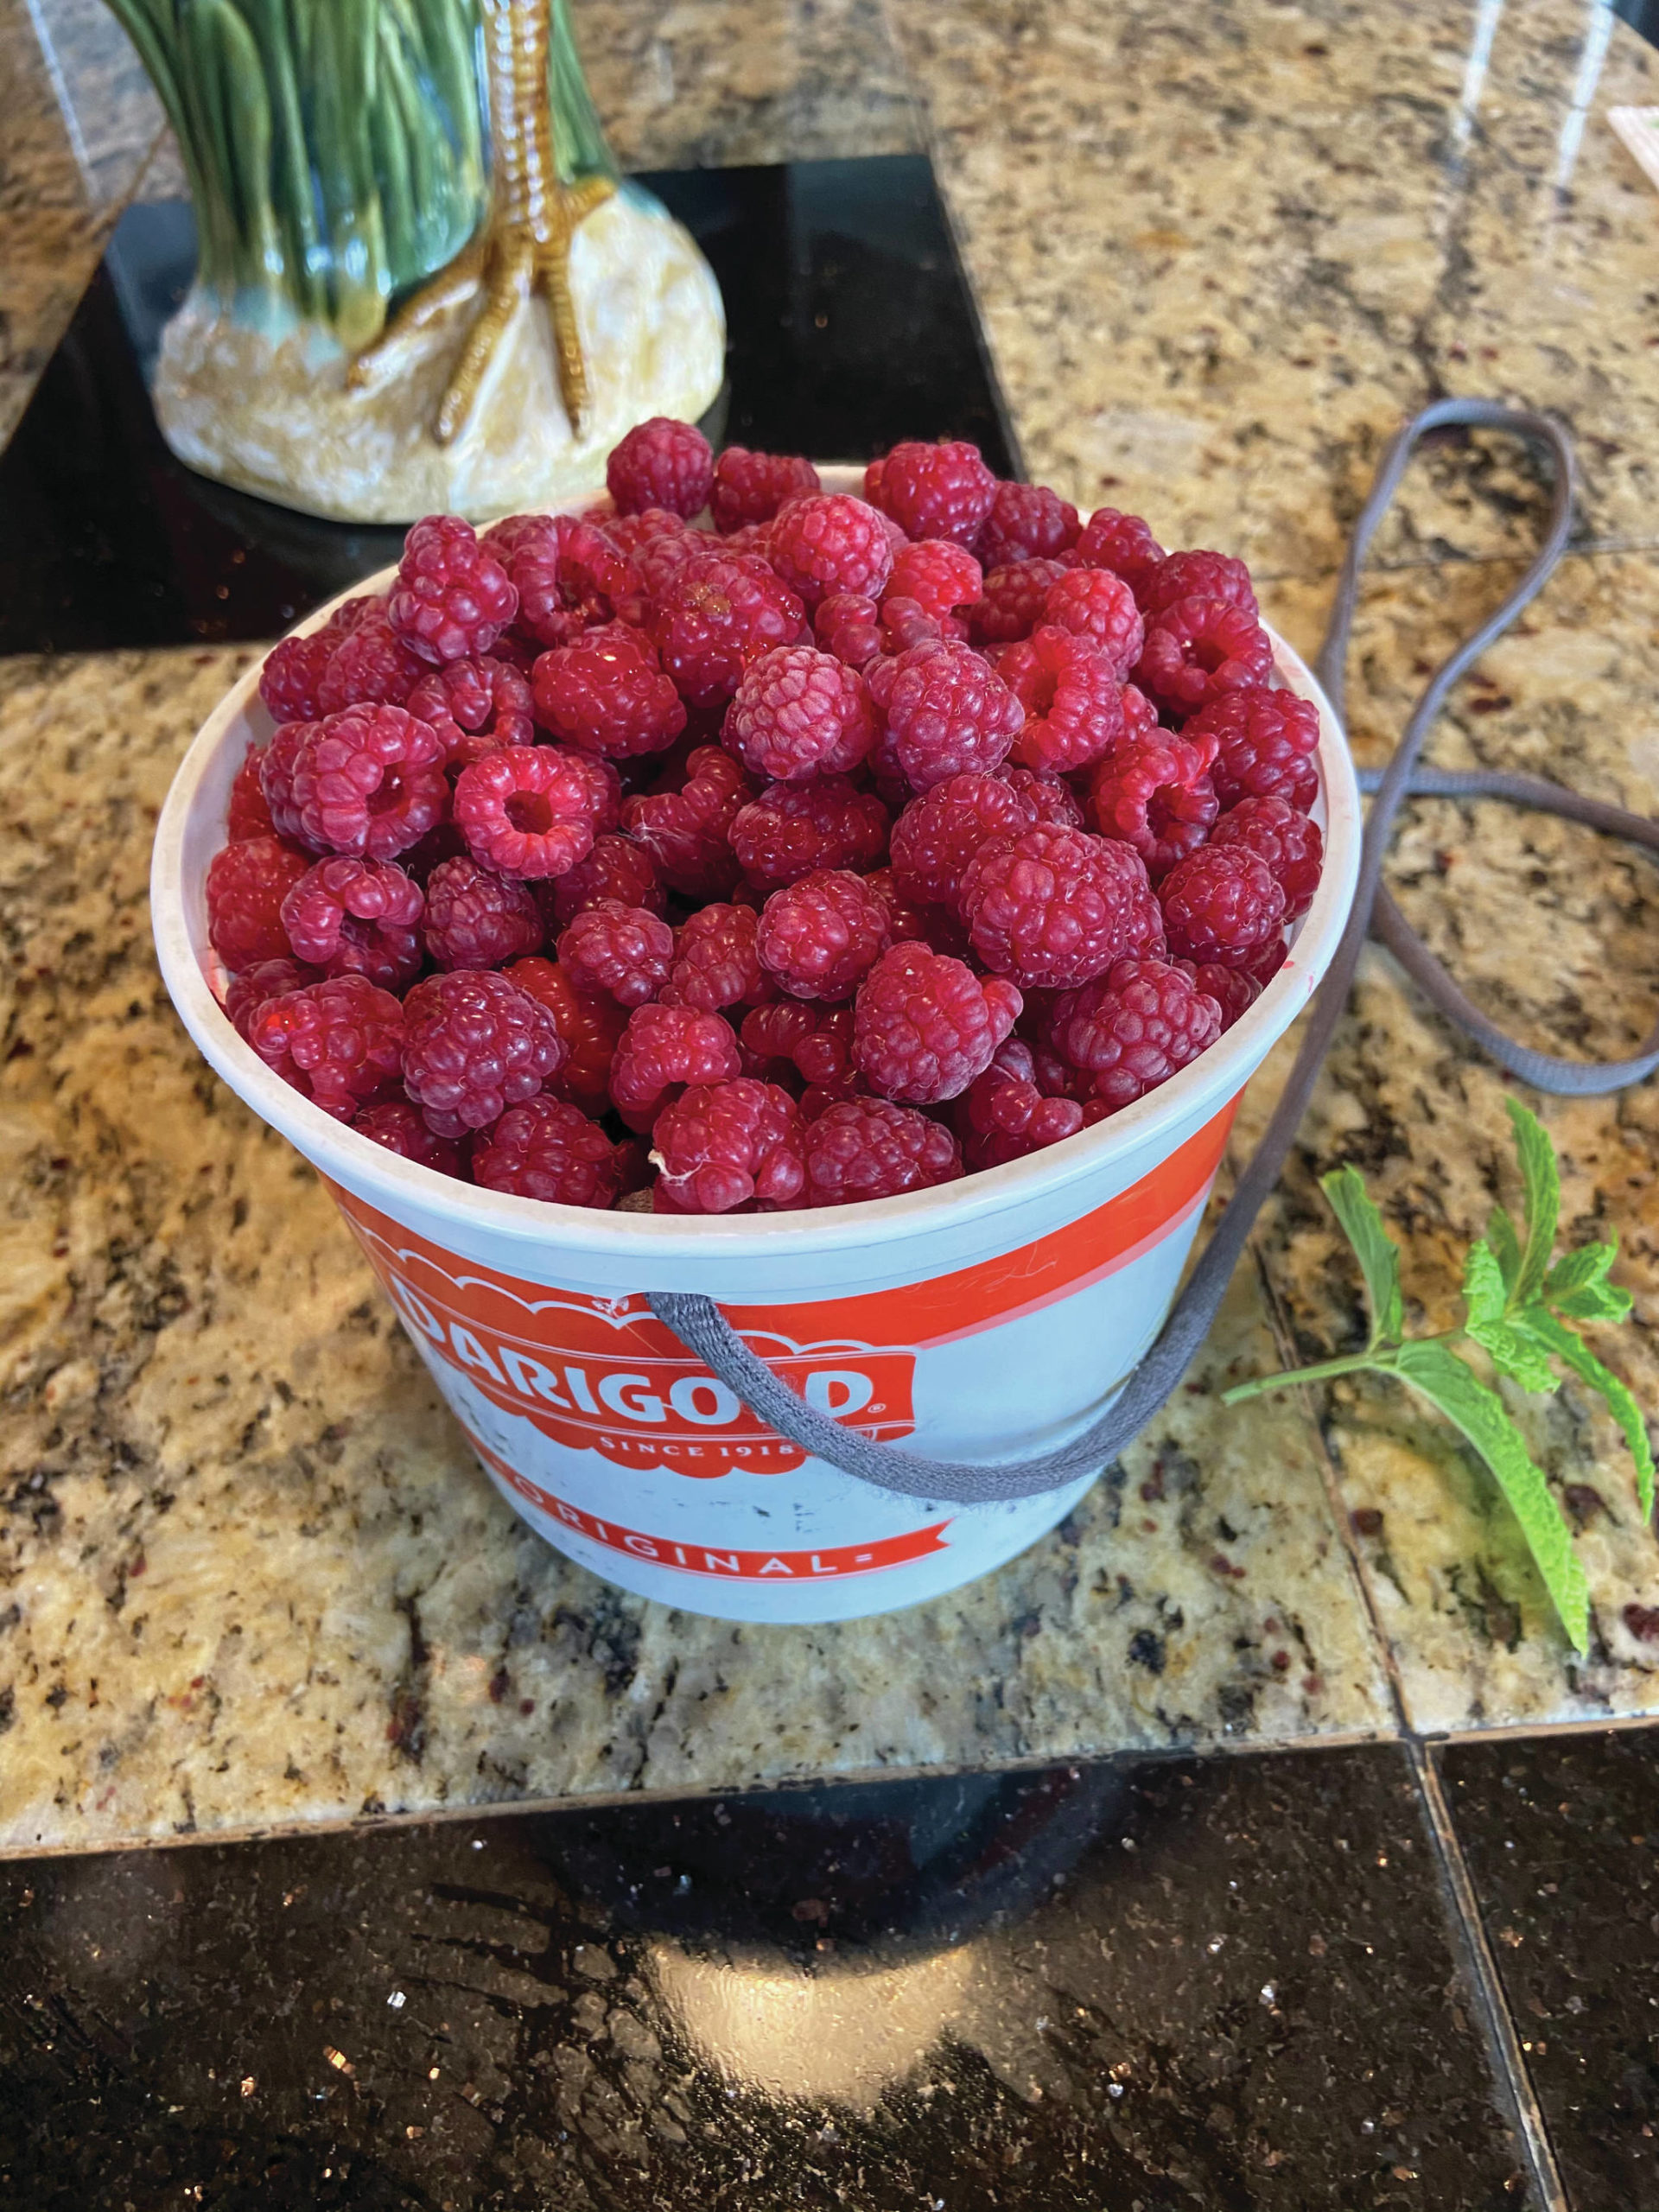 Teri Robl uses a butter tub with a rope as her berry-picking container, as seen here in her Homer, Alaska, kitchen on Sept. 8, 2020. (Photo by Teri Robl)